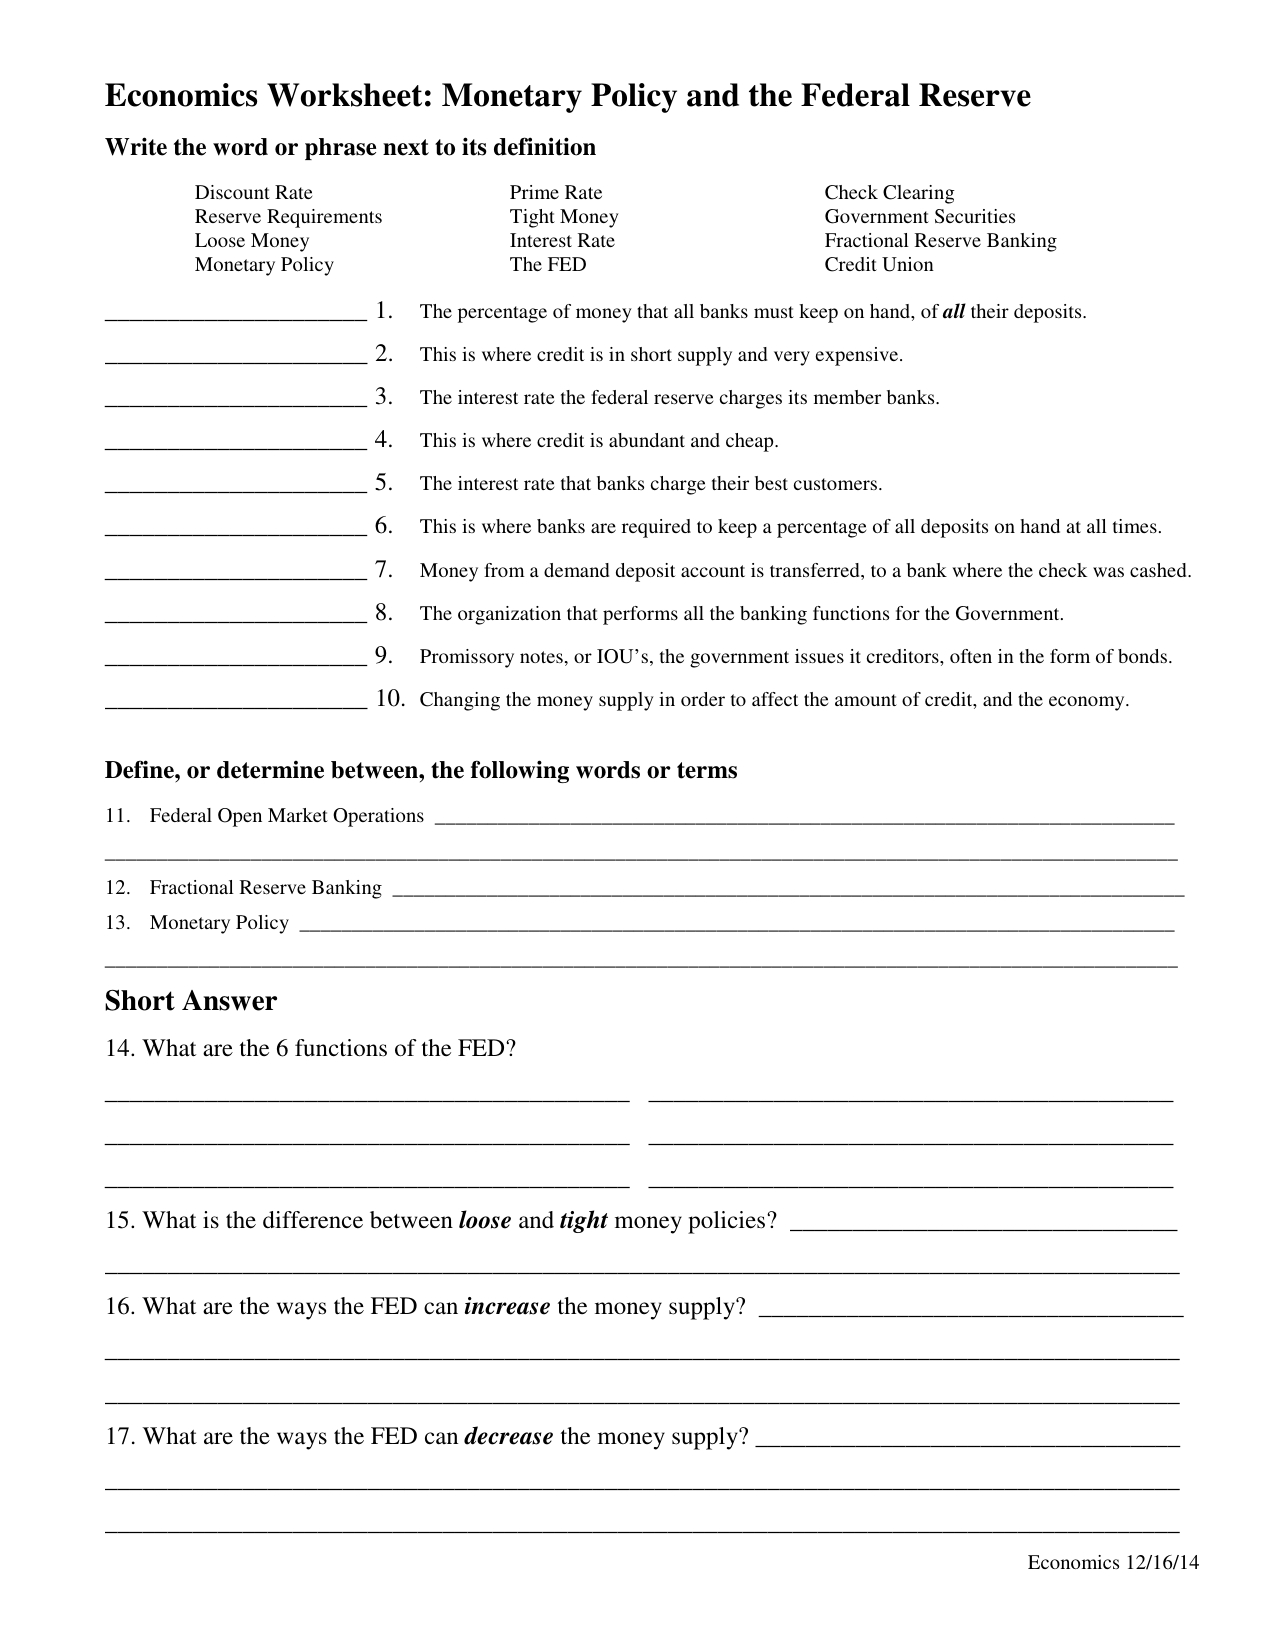 Monetary Policy Worksheet Answers Db excel